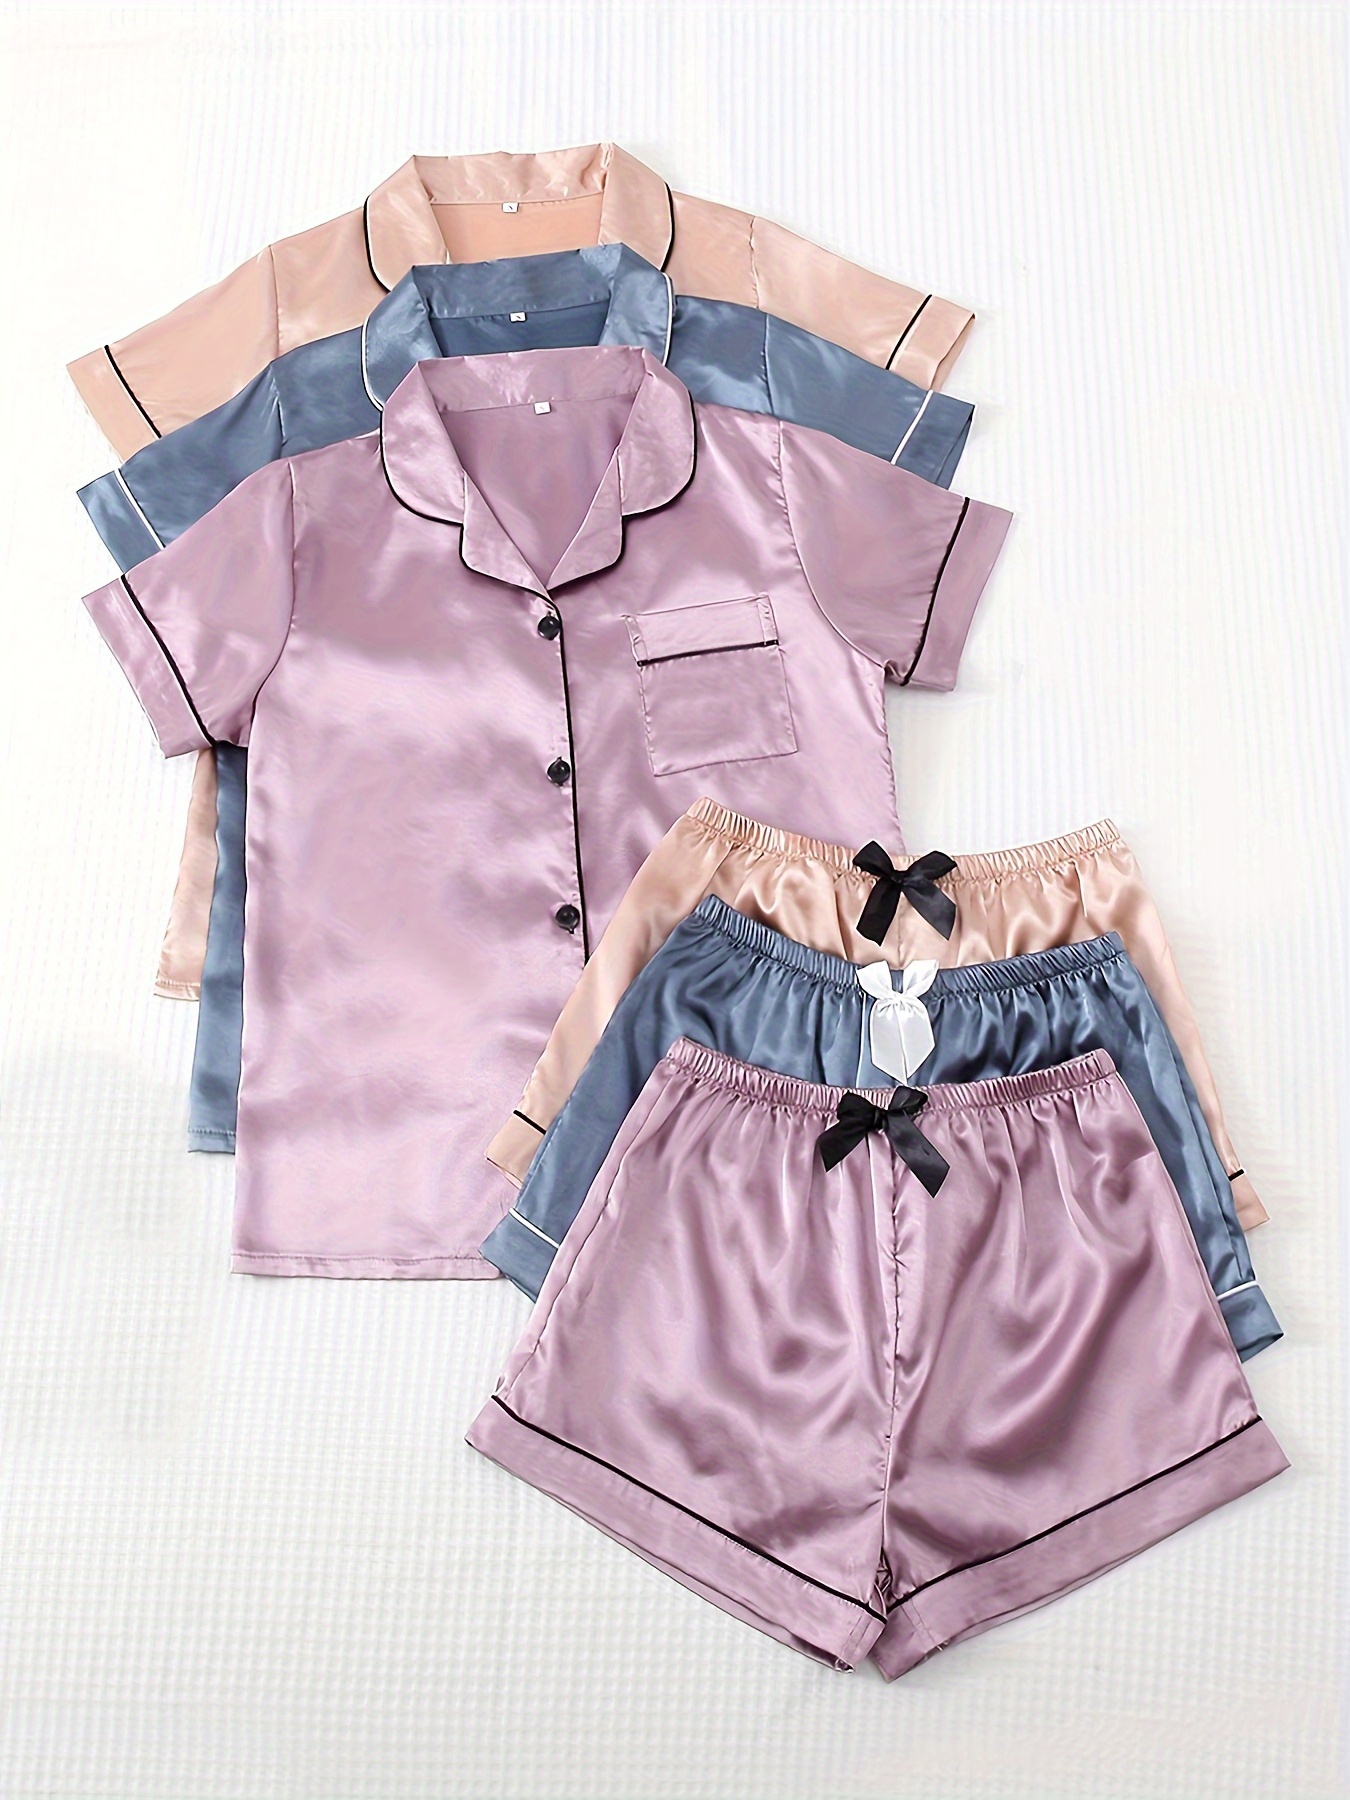 Satin Chilling Out Top and Shorts Pyjama Set  Short pajama set, Pajama  shorts, Pajama set